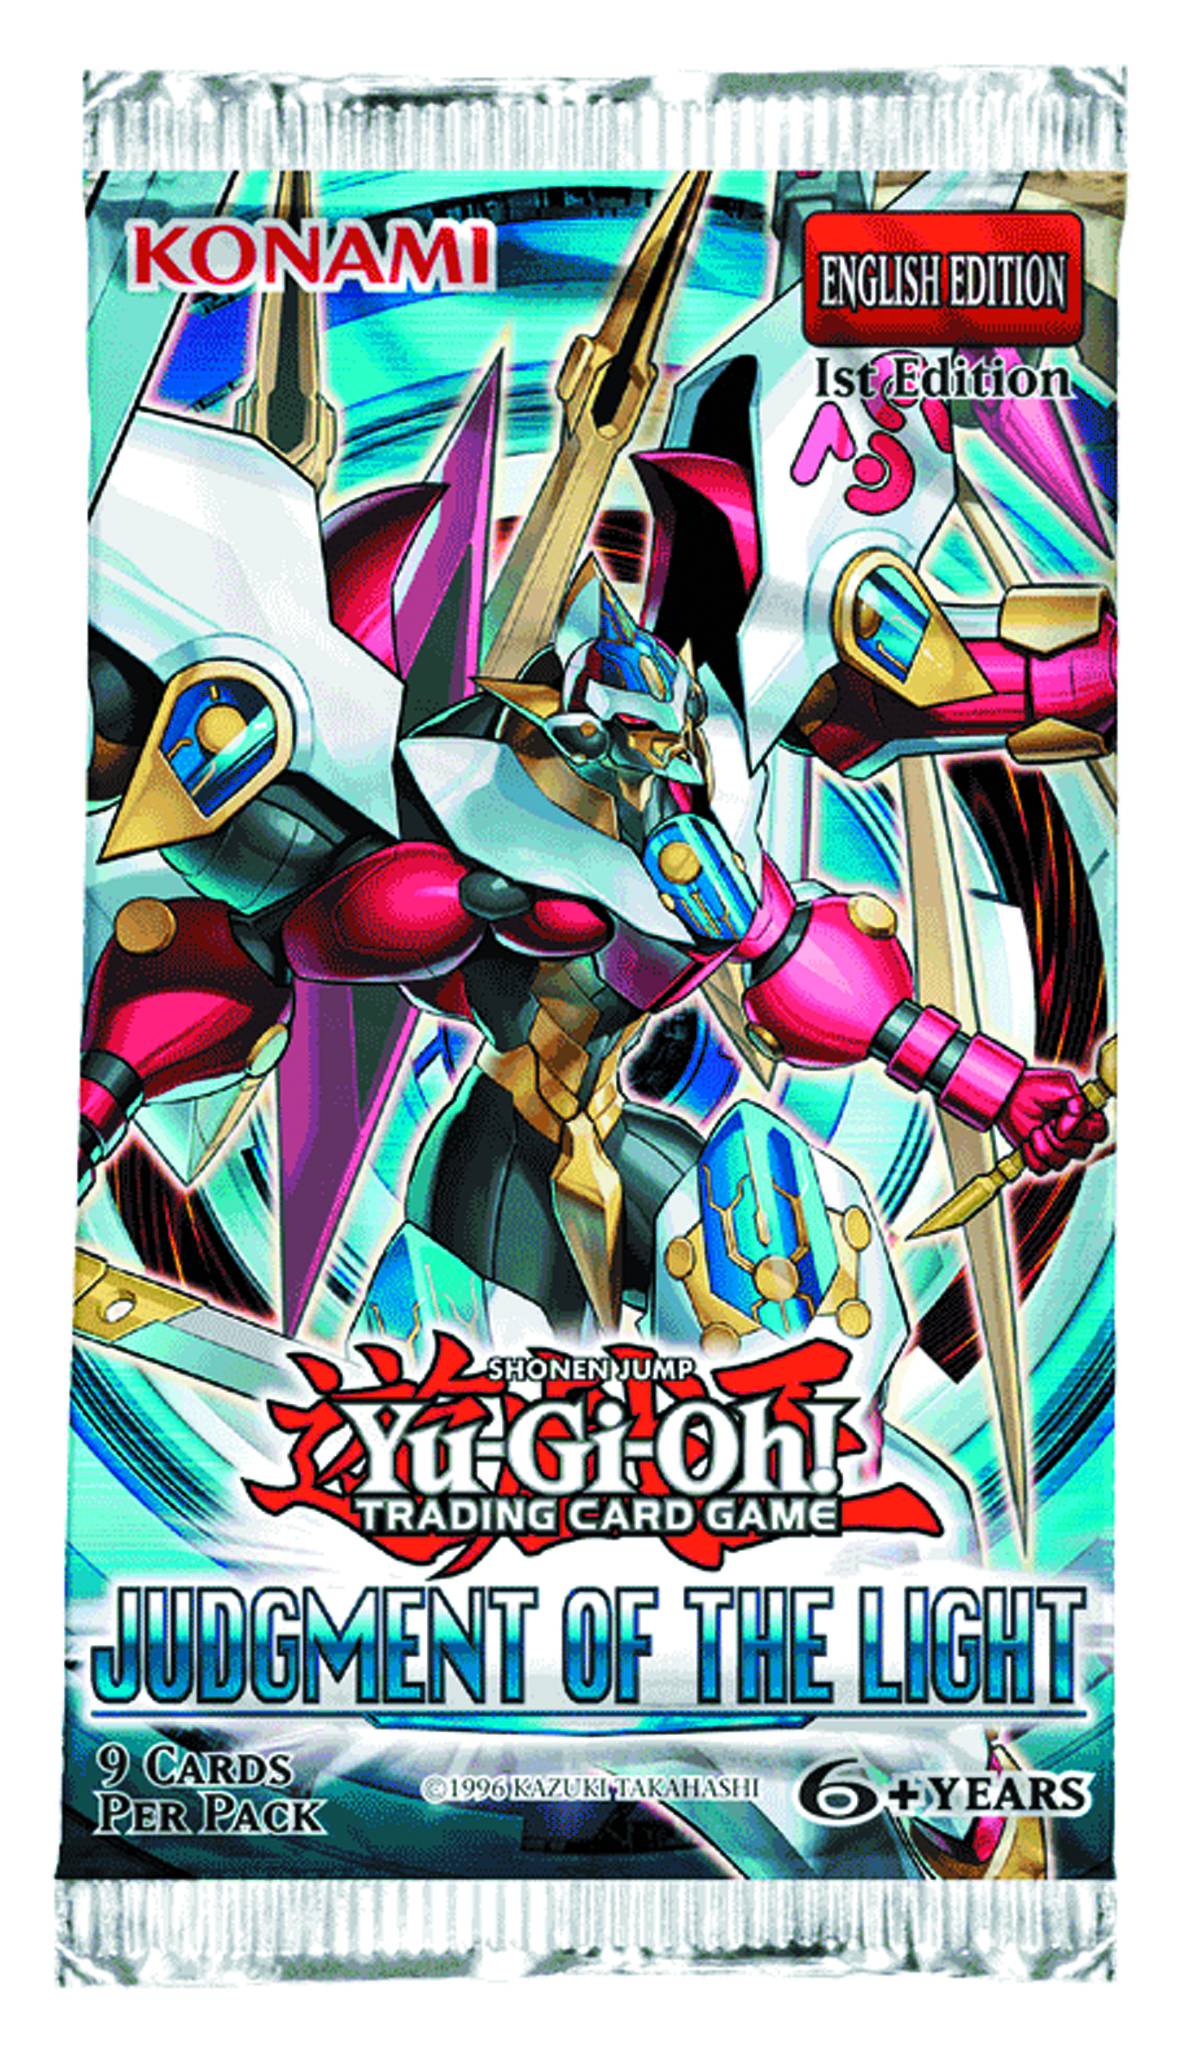 YU-GI-OH! (YGO): JUDGMENT OF THE LIGHT BOOSTER PACK